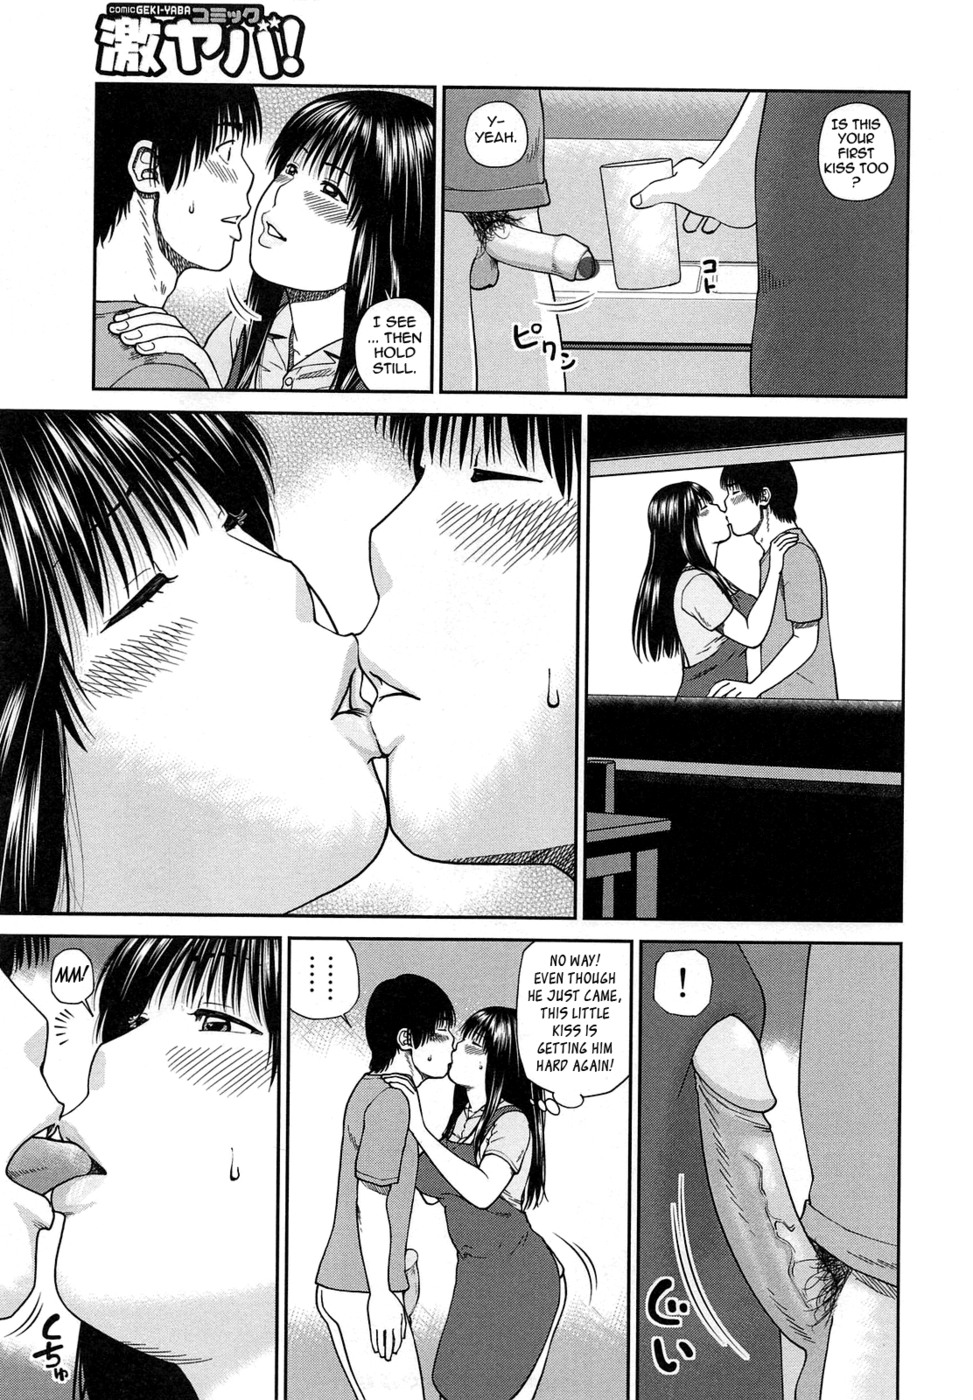 Poranxvideo - 35 Year Old Ripe Wife-Chapter 5-The Night I Was Aroused By My Son's Friend  (First Half)-Hentai Manga Hentai Comic - Page: 19 - Online porn video at  mobile